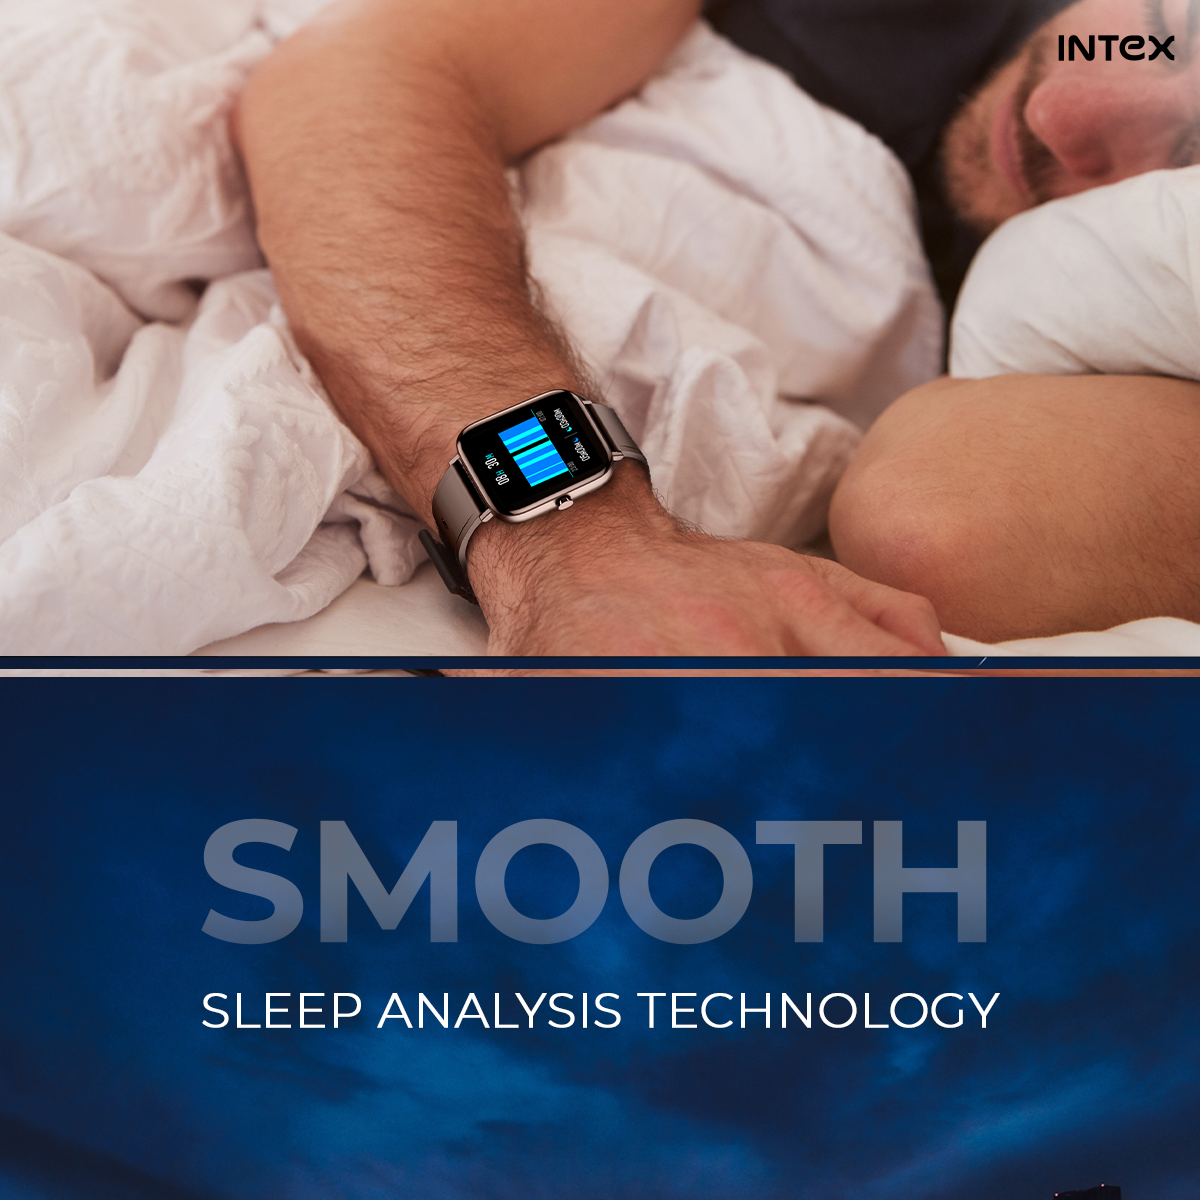 Sleep Tracking in Smartwatches - Everything You Need to Know! Intex Technologies